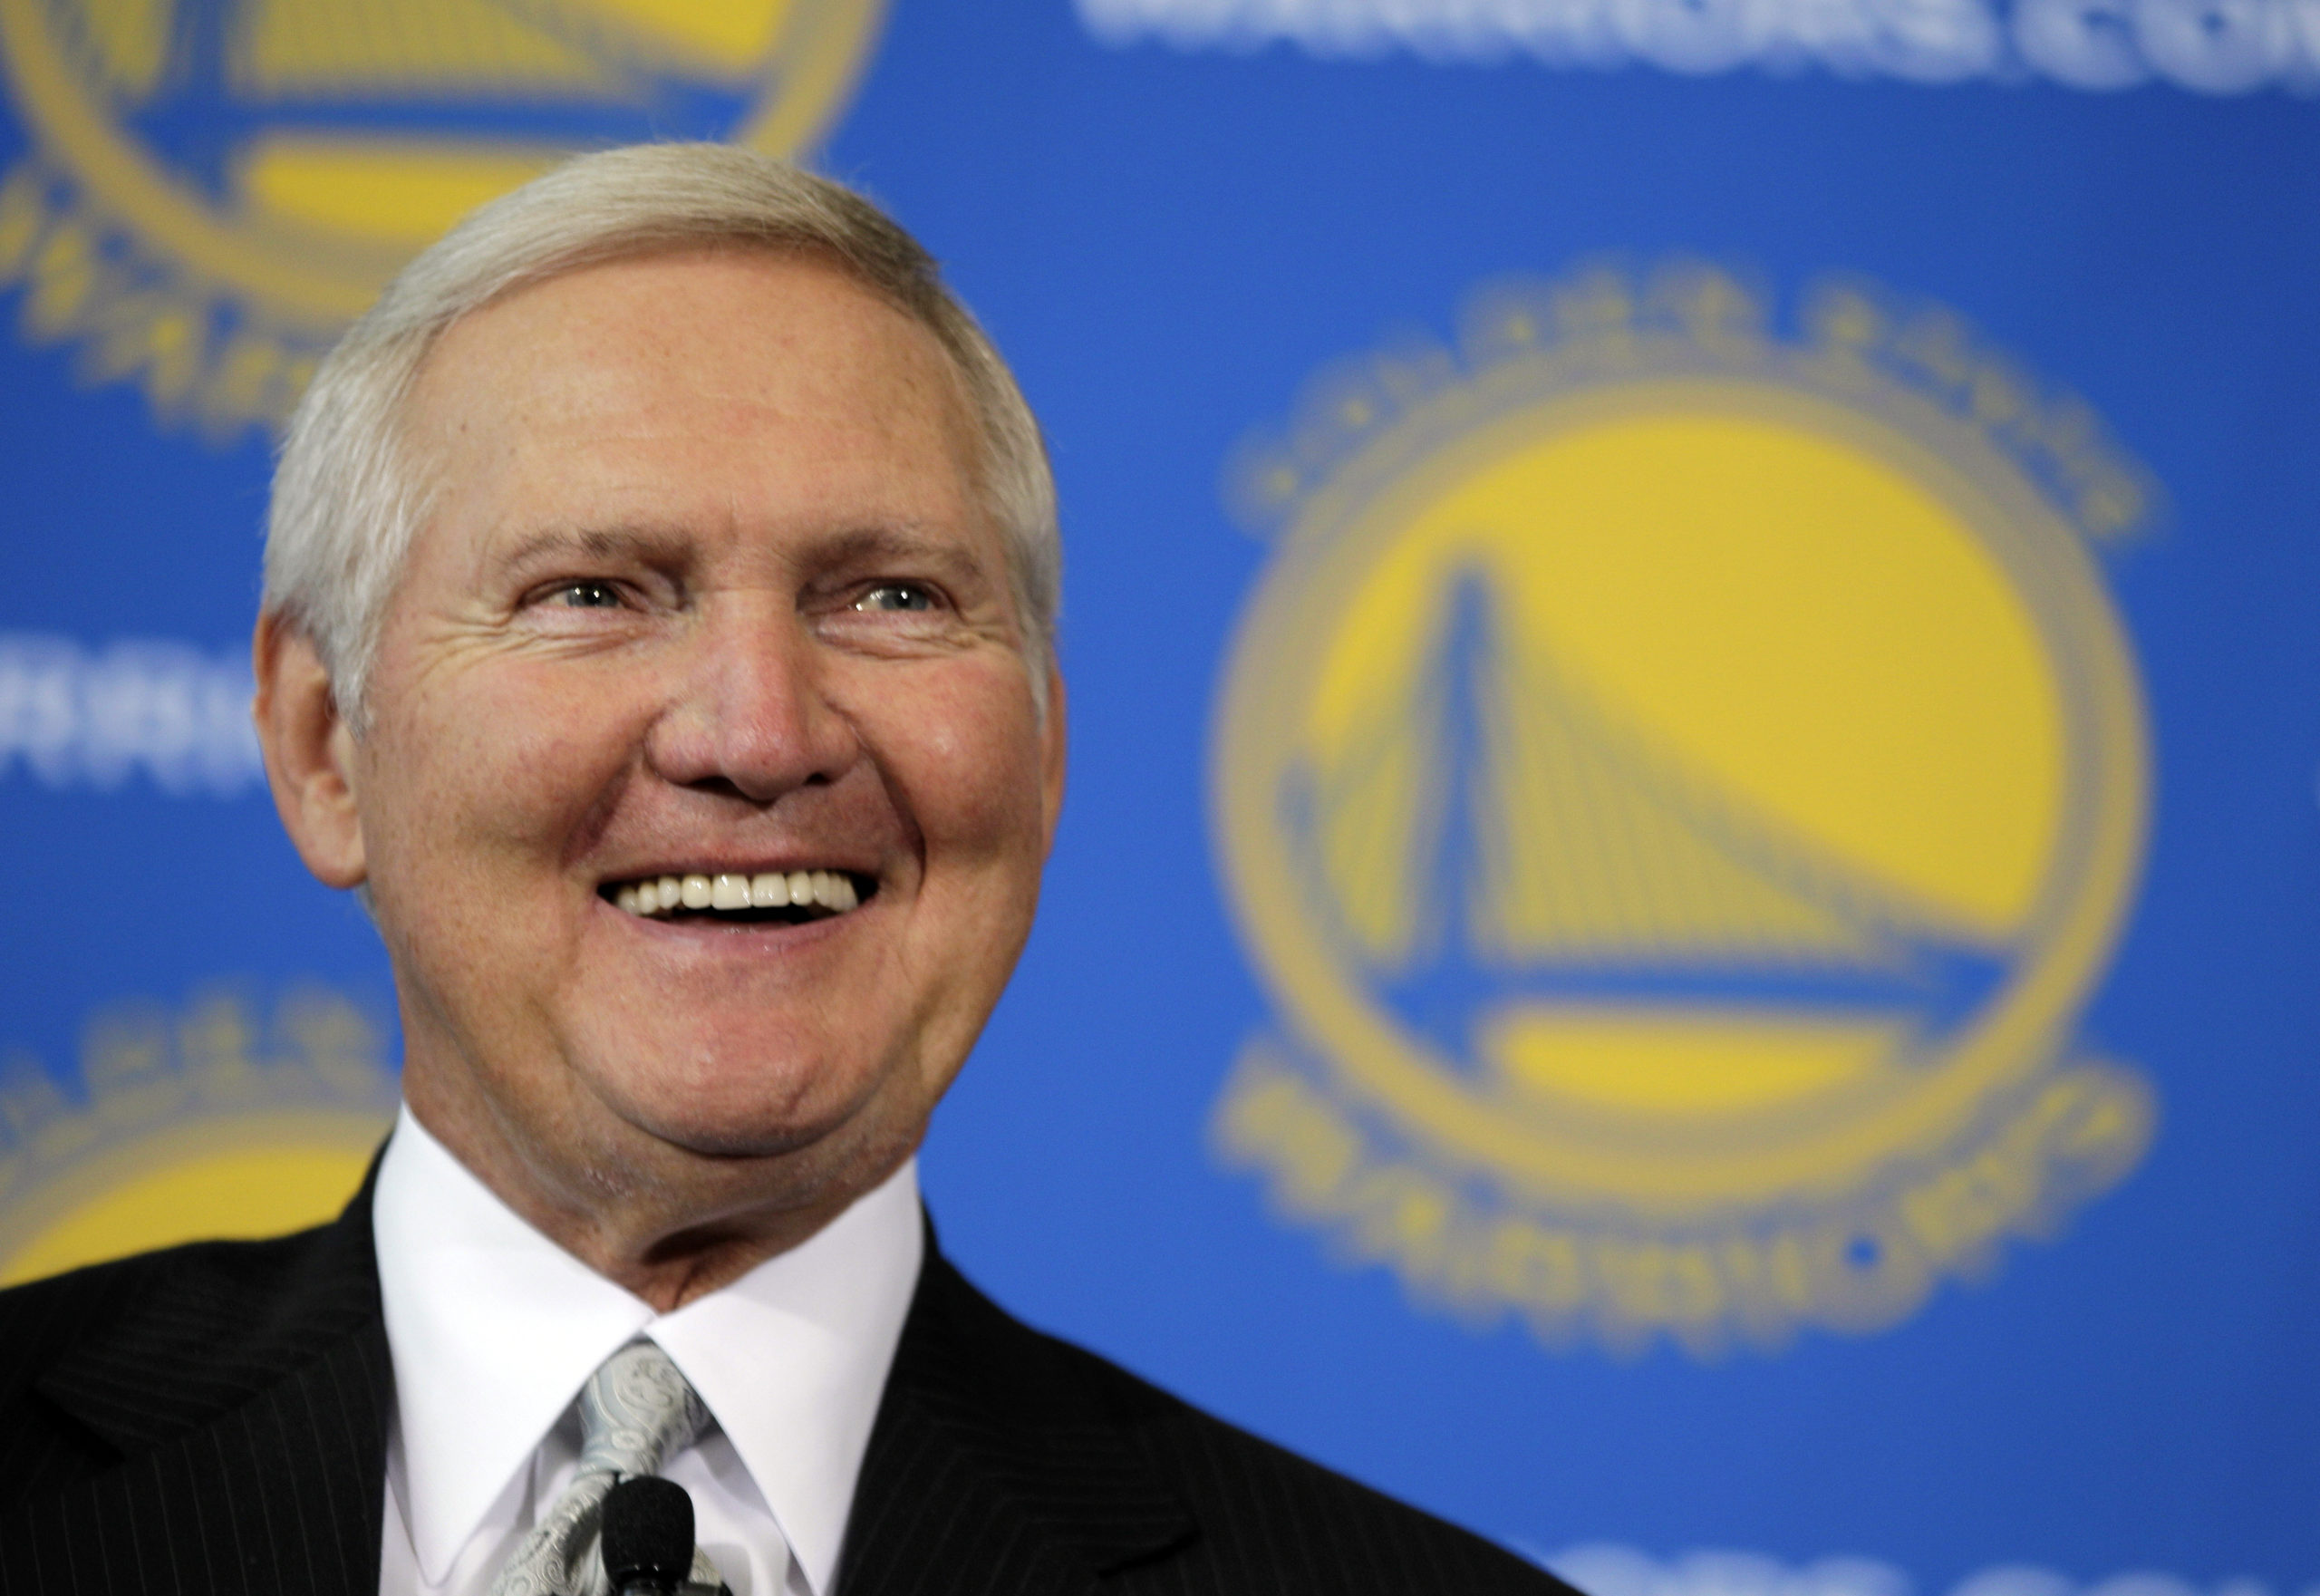 Jerry West smiles after being introduced as a new member of the Golden State Warriors basketball club's Executive Board, during a news conference in San Francisco, California, on May 24, 2011.